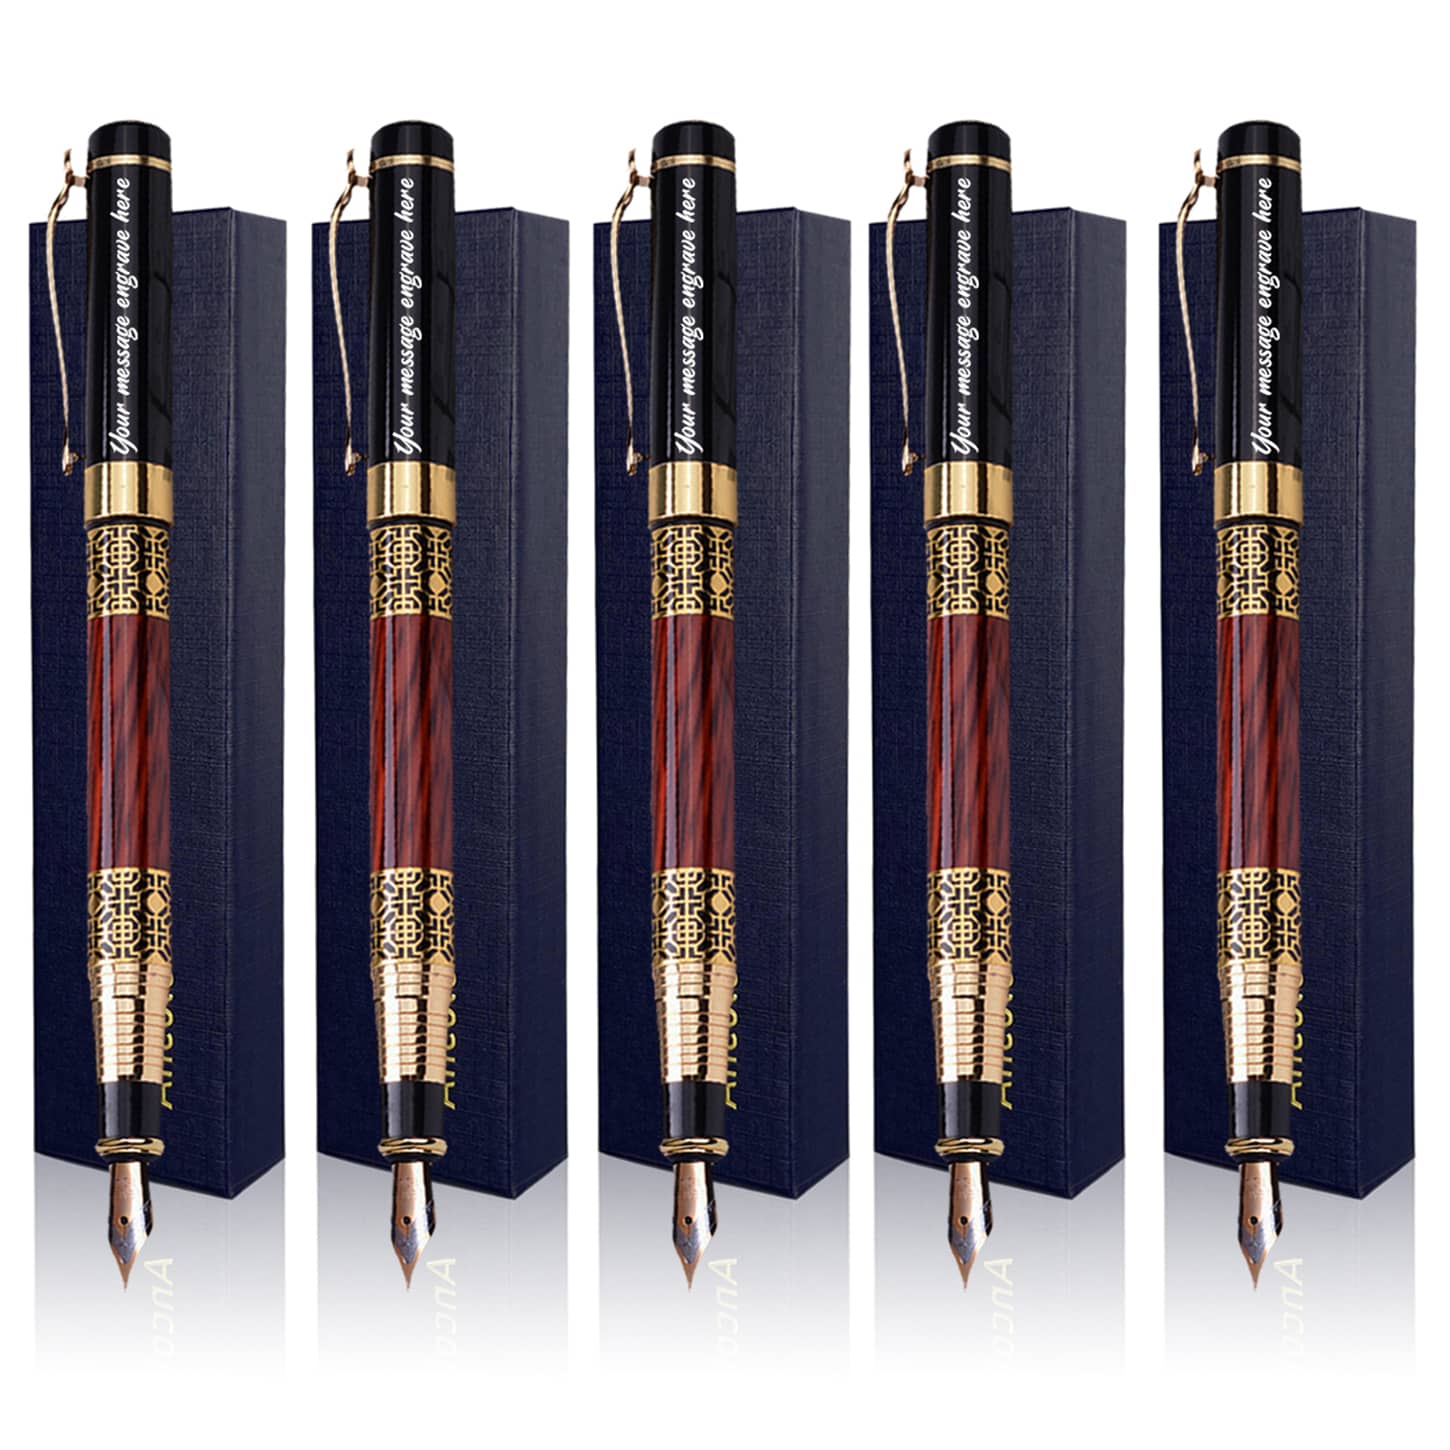 Executive 3 Piece Pen and Pencil Set in Glossy Black Finish